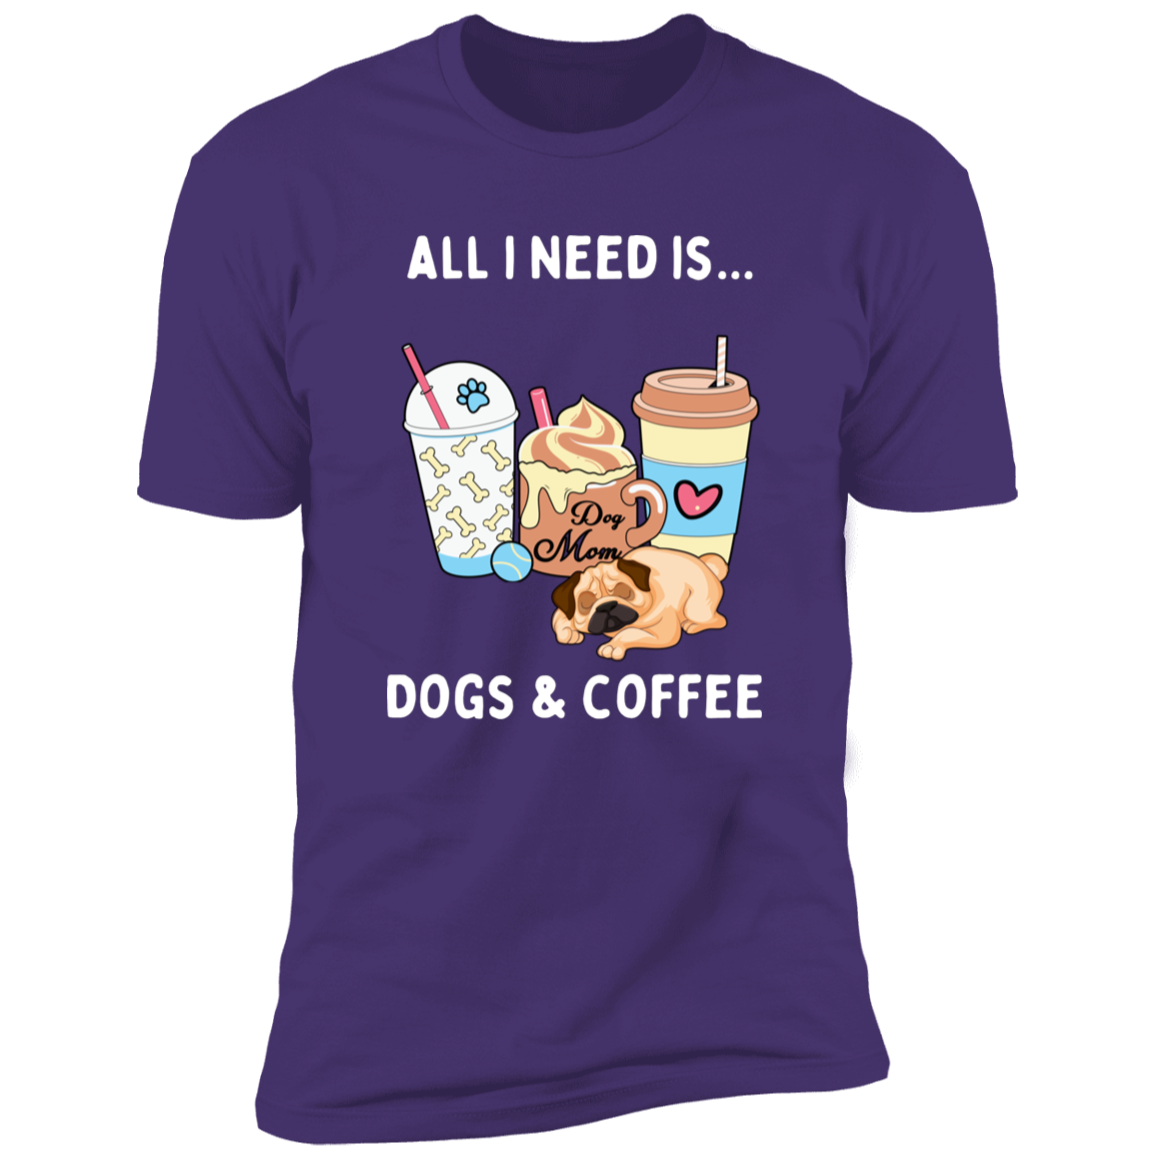 All I Need is Dogs and Coffee, Dog shirt for humas, in purple rush